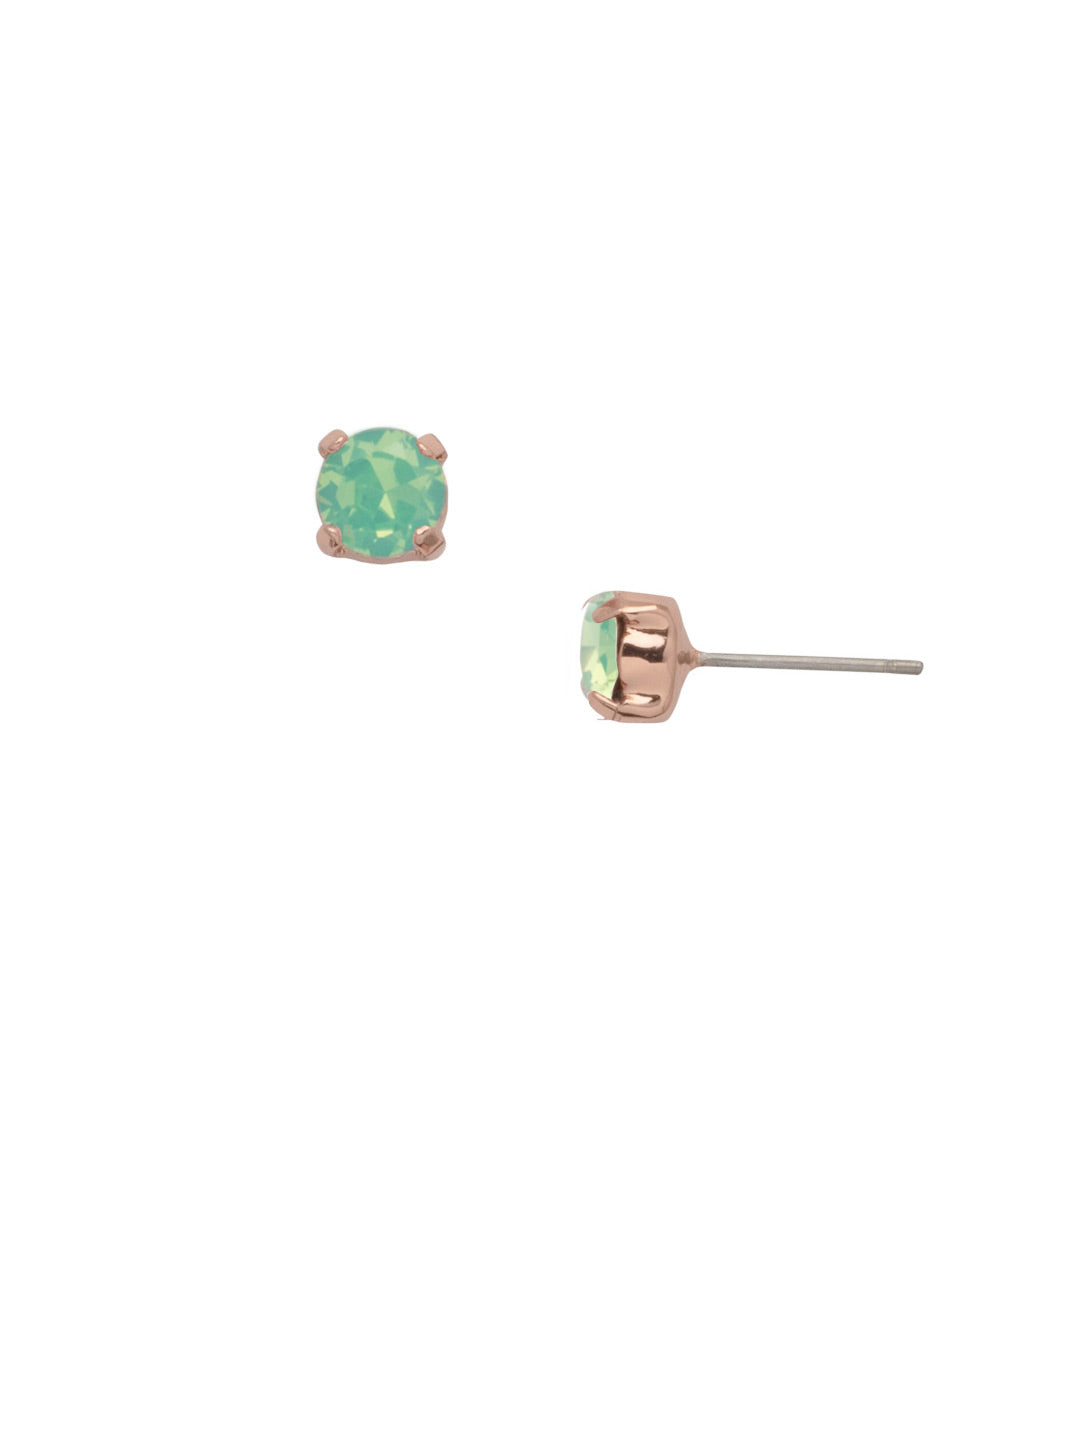 Jayda Stud Earrings - EDN32RGPAC - <p>The Jayda Stud Earrings are the perfect every day wardrobe staple. A round crystal nestles perfectly in a metal plated post with four prongs. </p><p>Need help picking a stud? <a href="https://www.sorrelli.com/blogs/sisterhood/round-stud-earrings-101-a-rundown-of-sizes-styles-and-sparkle">Check out our size guide!</a> From Sorrelli's Pacific Opal collection in our Rose Gold-tone finish.</p>